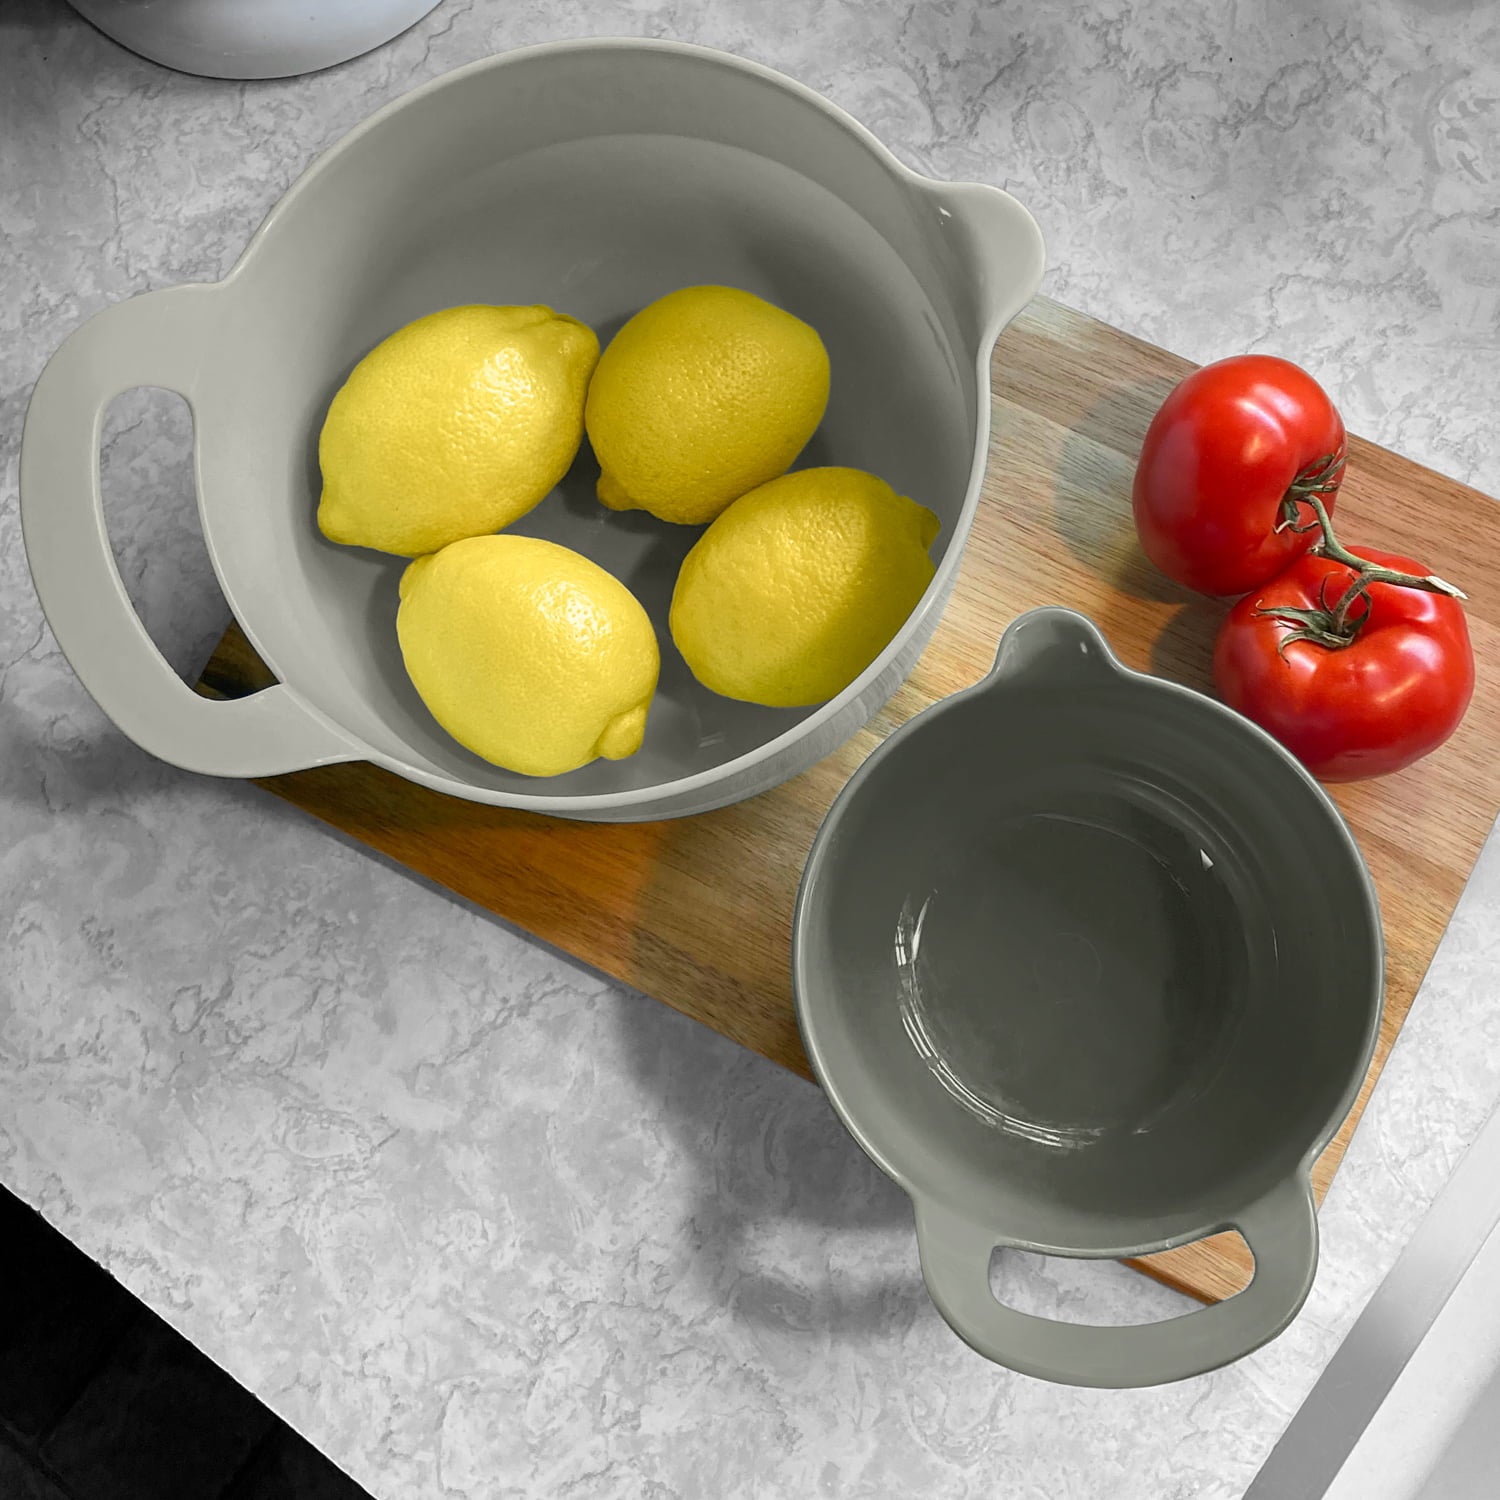 Edge Mixing Bowls 4 Piece Plastic Non-Skid Nesting Bowls with Spouts and Handles, Charcoal